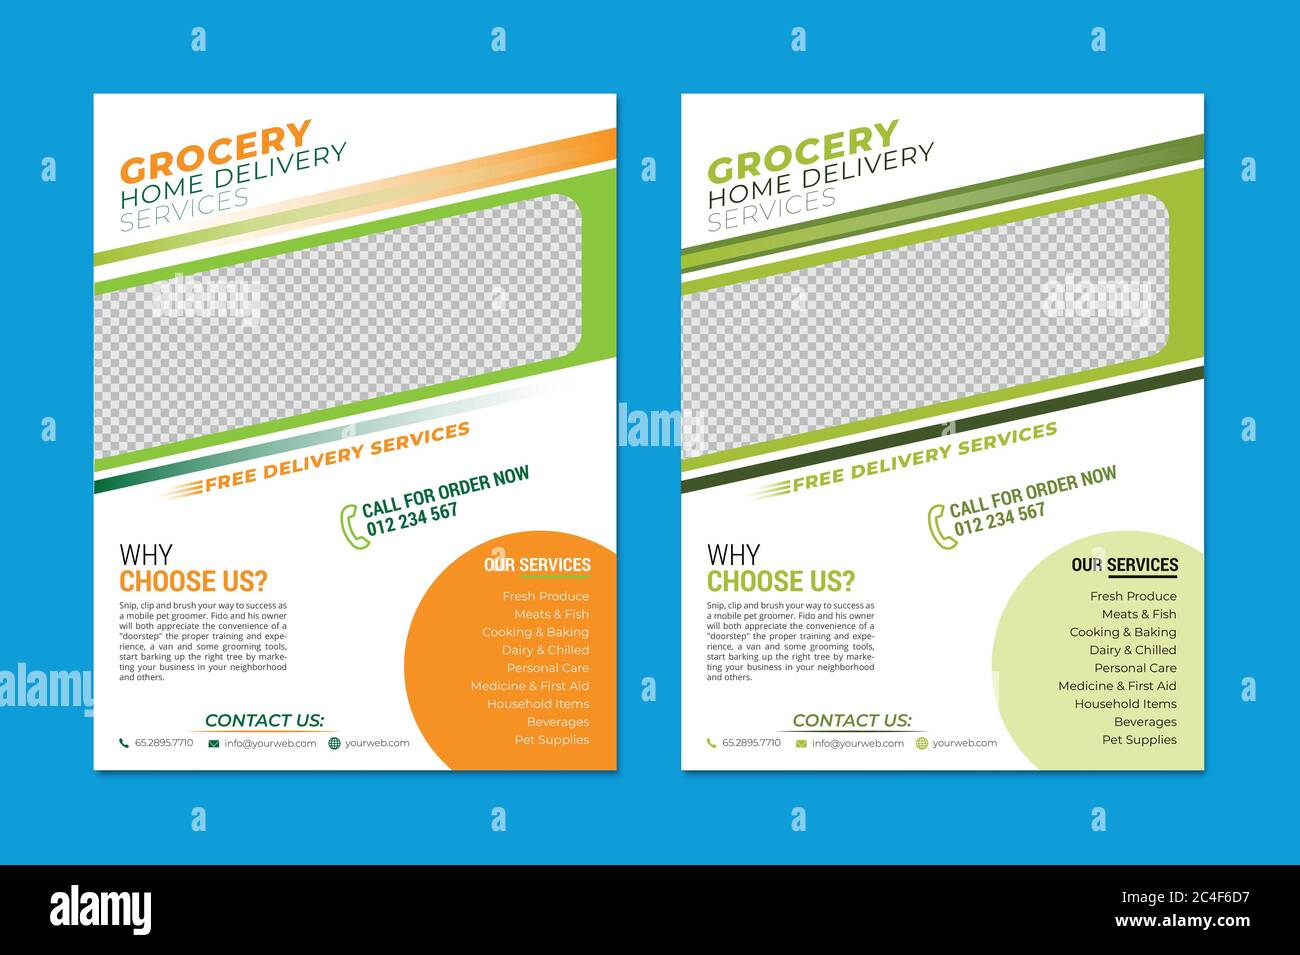 Grocery Food Delivery Flyer Template & Food Flyer Template Stock Vector